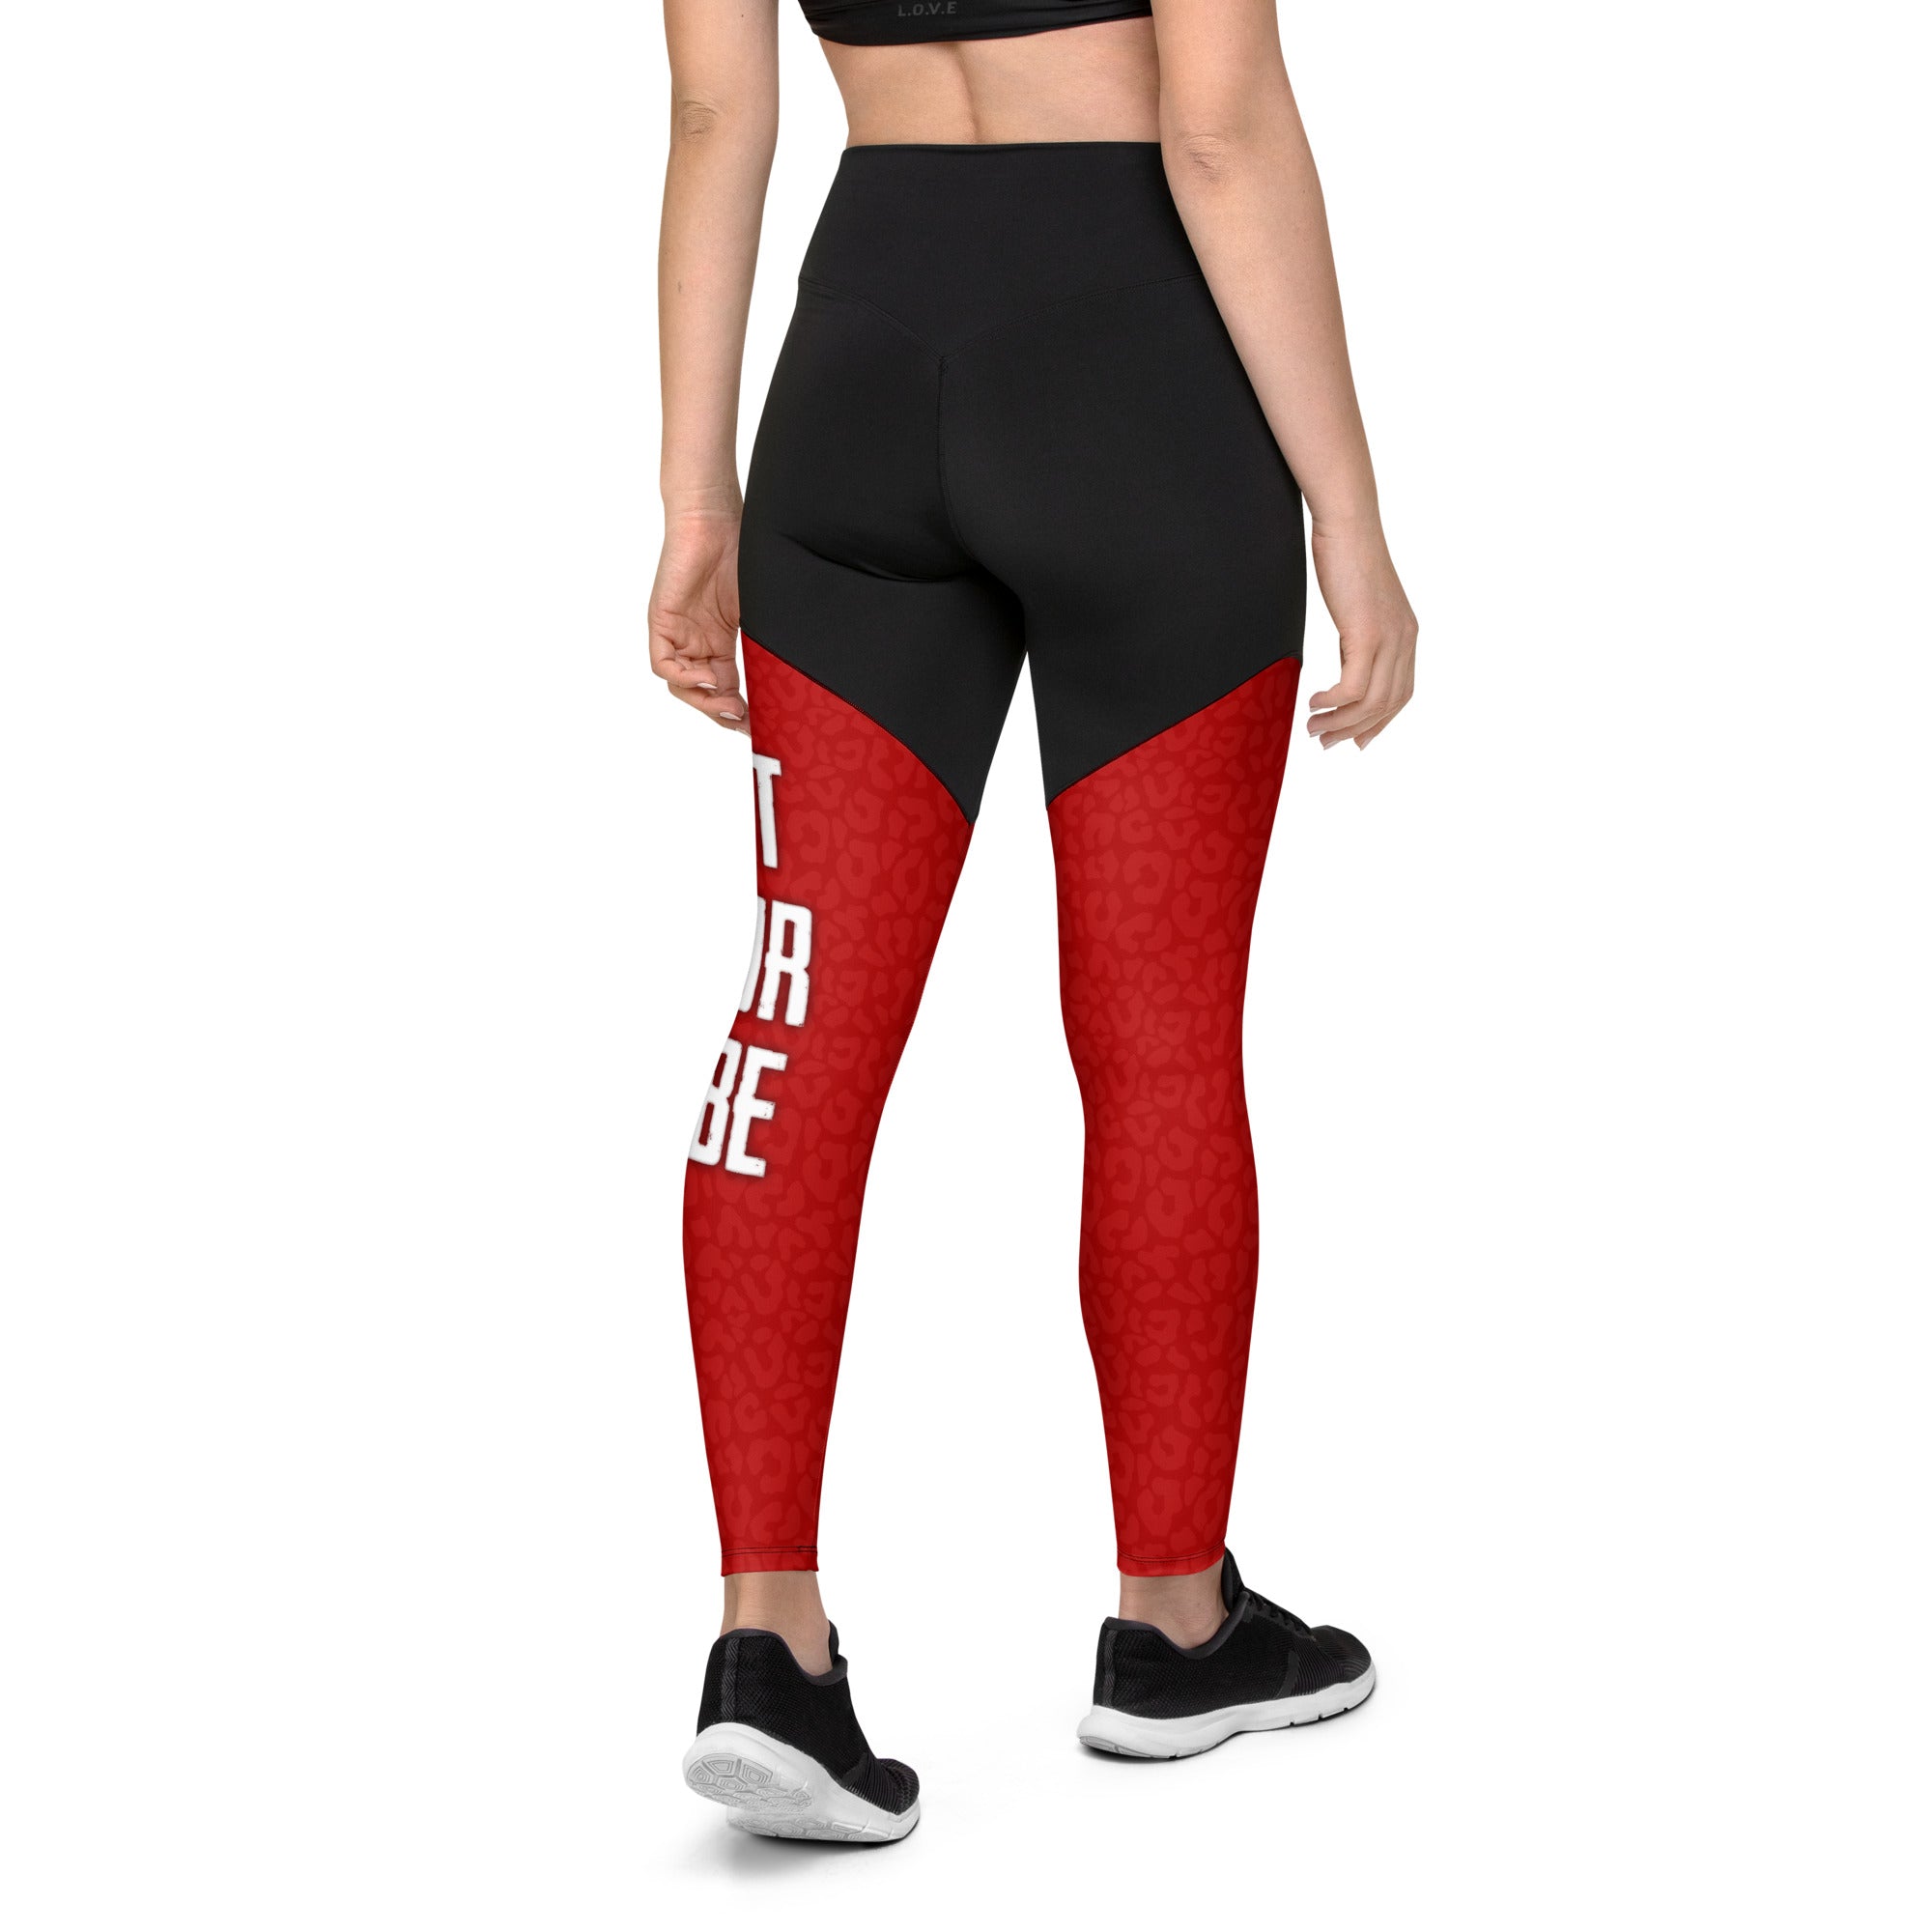 Not Your Babe Compression Leggings